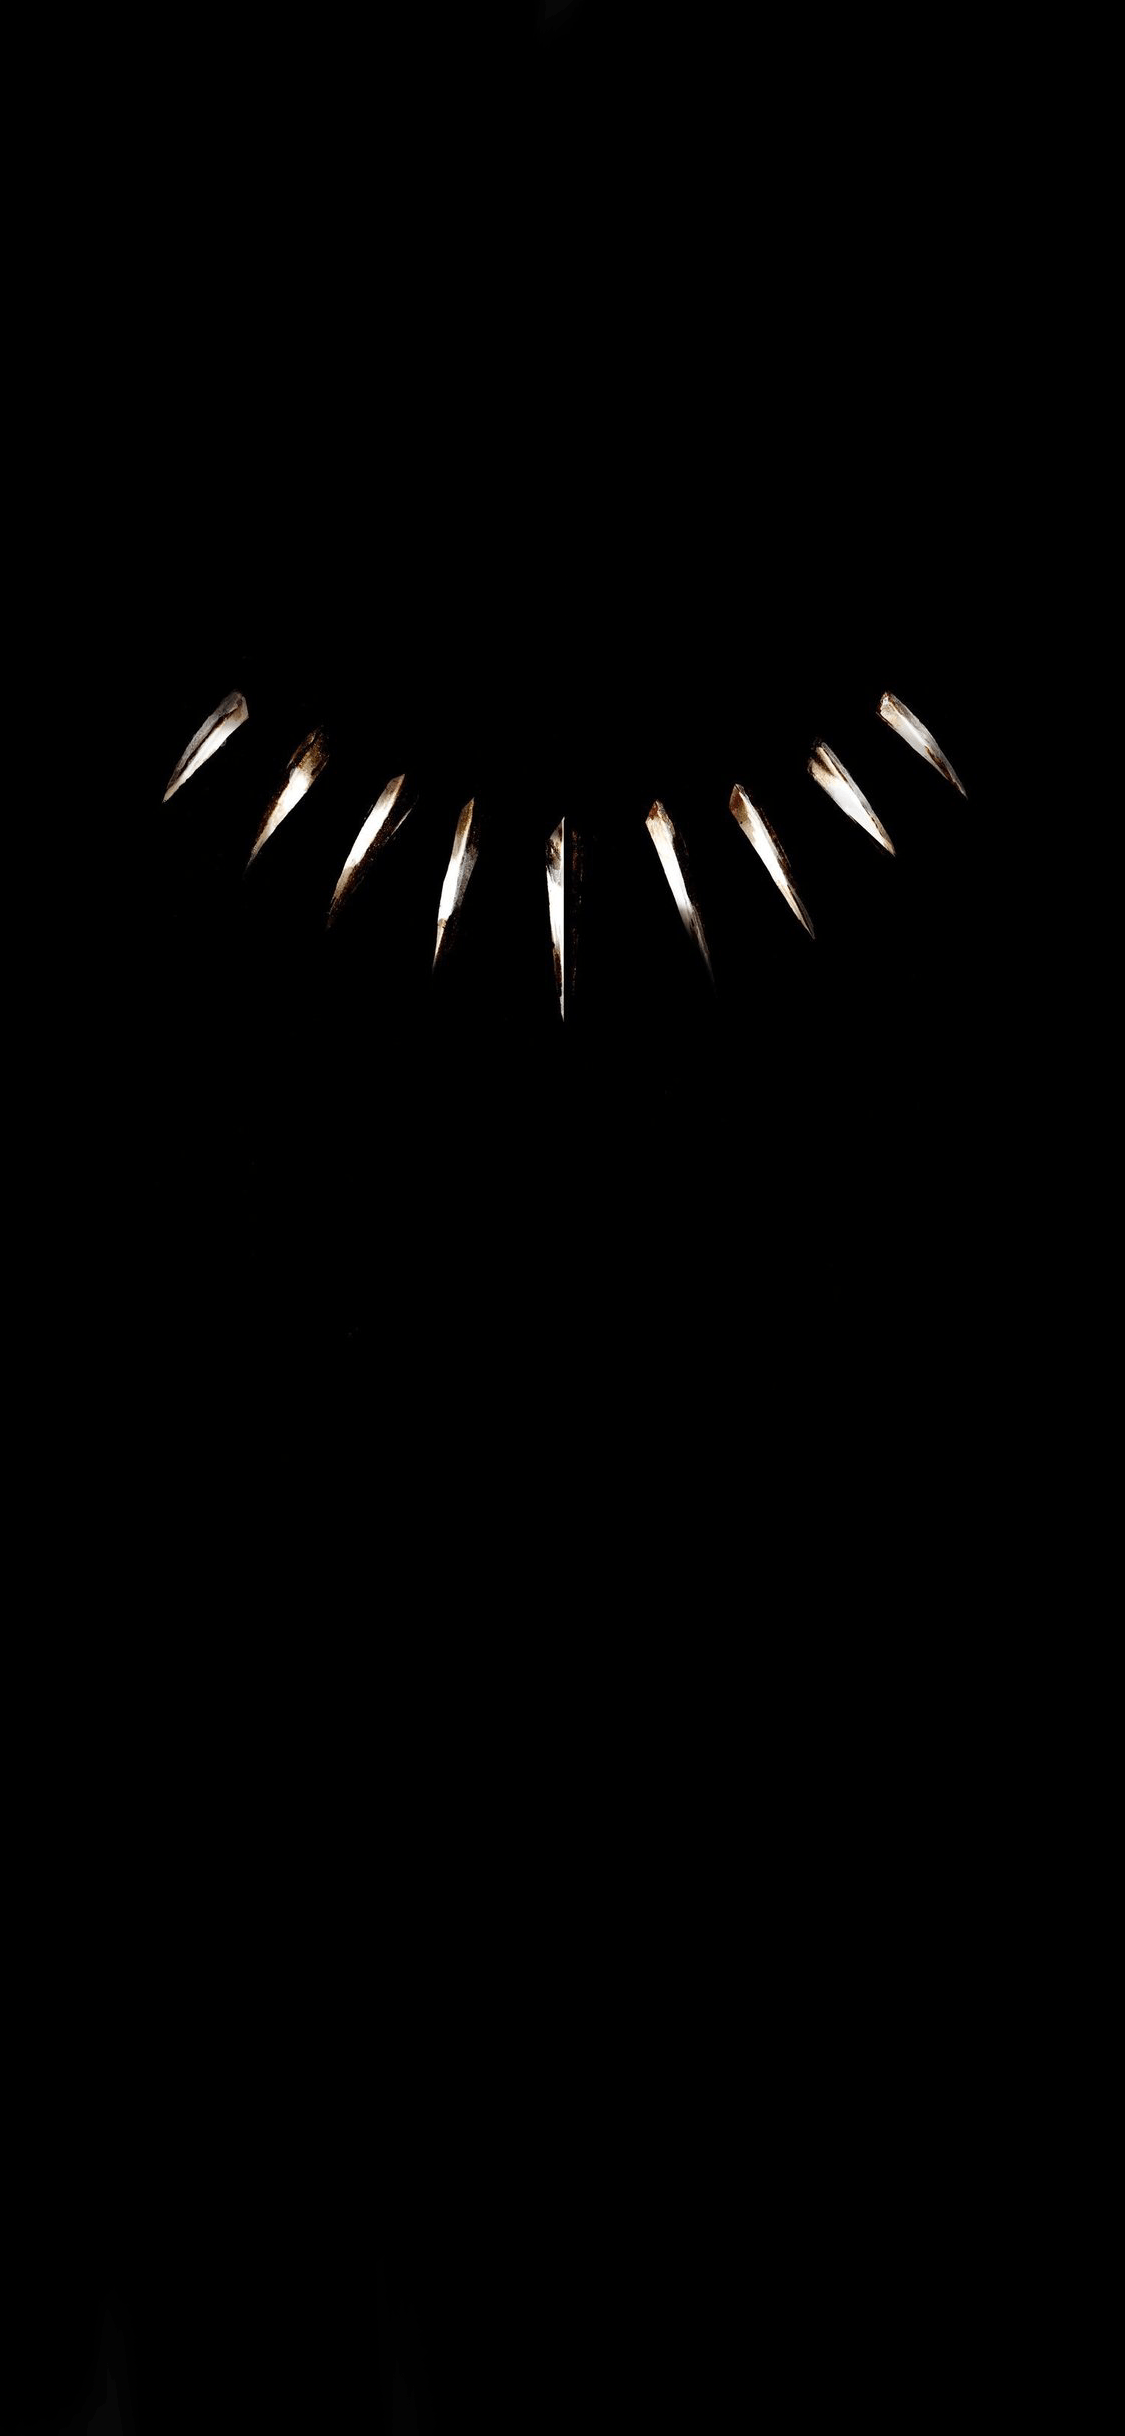 Black Panther Soundtrack wallpaper. It looks great on an AMOLED